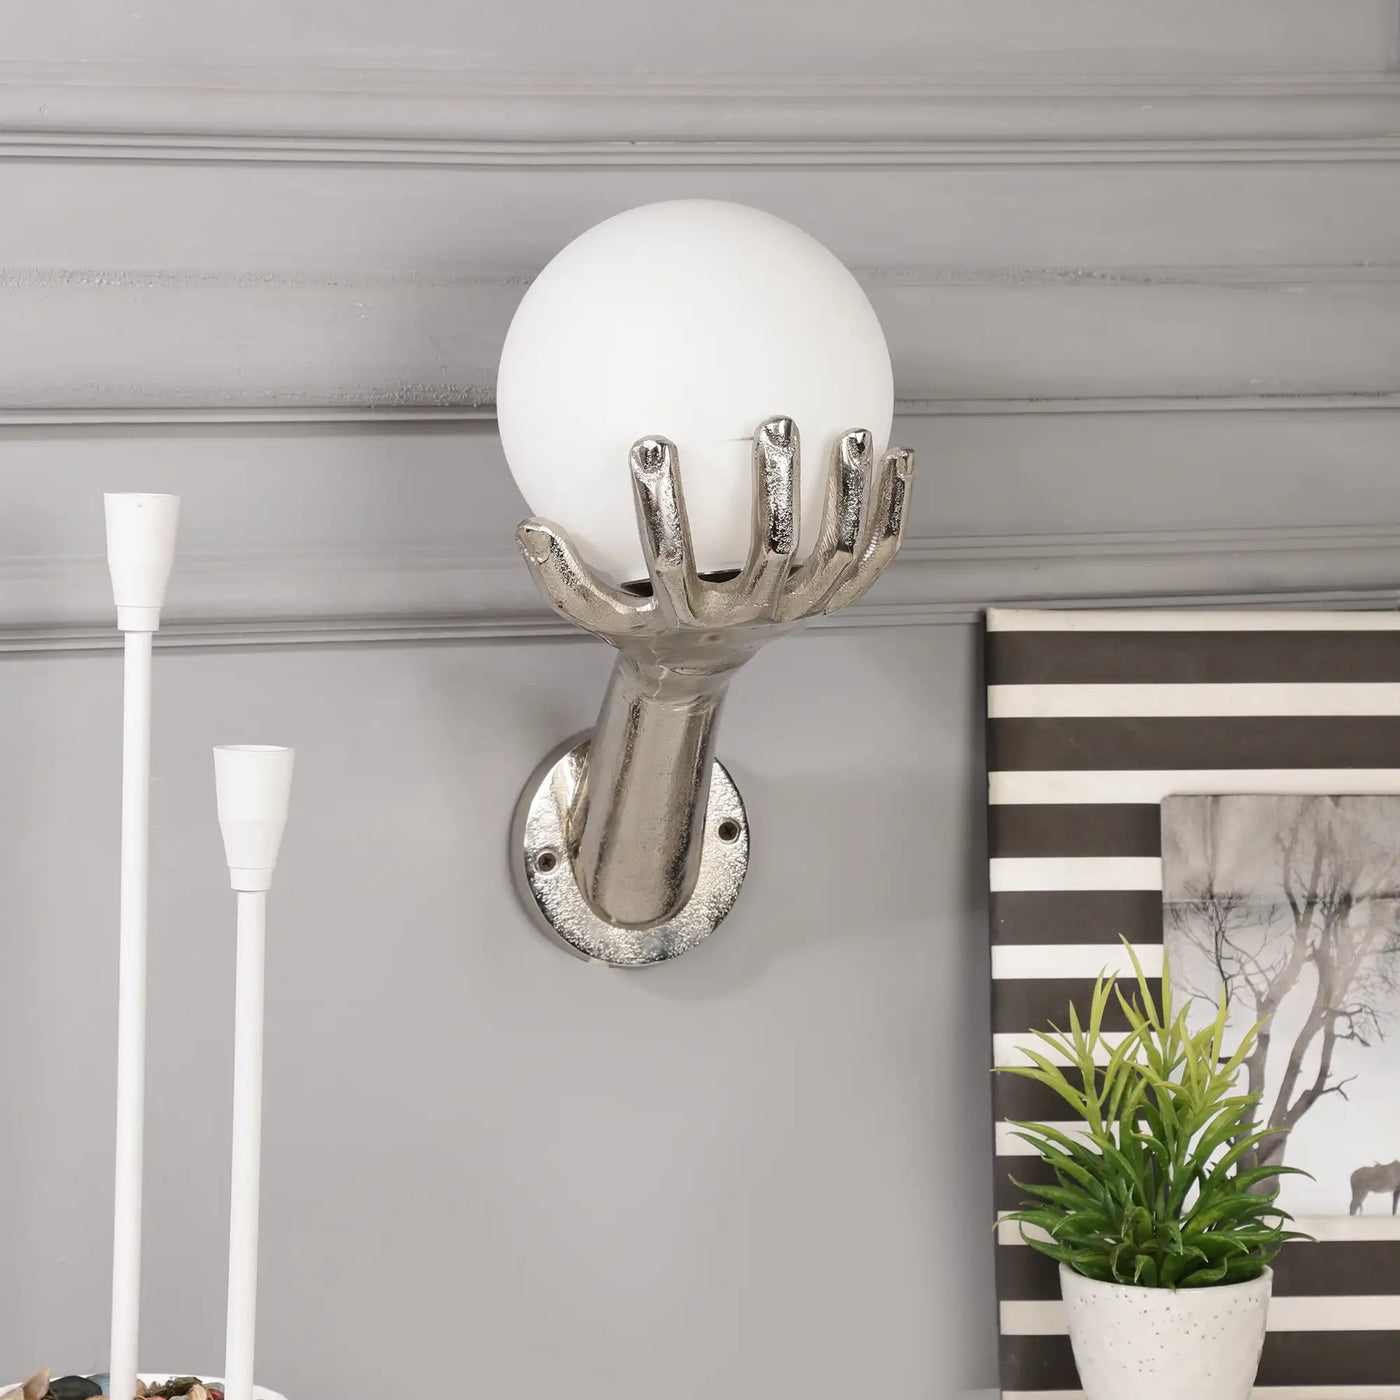 Hand Wall Light in Silver- 73-238-28-1